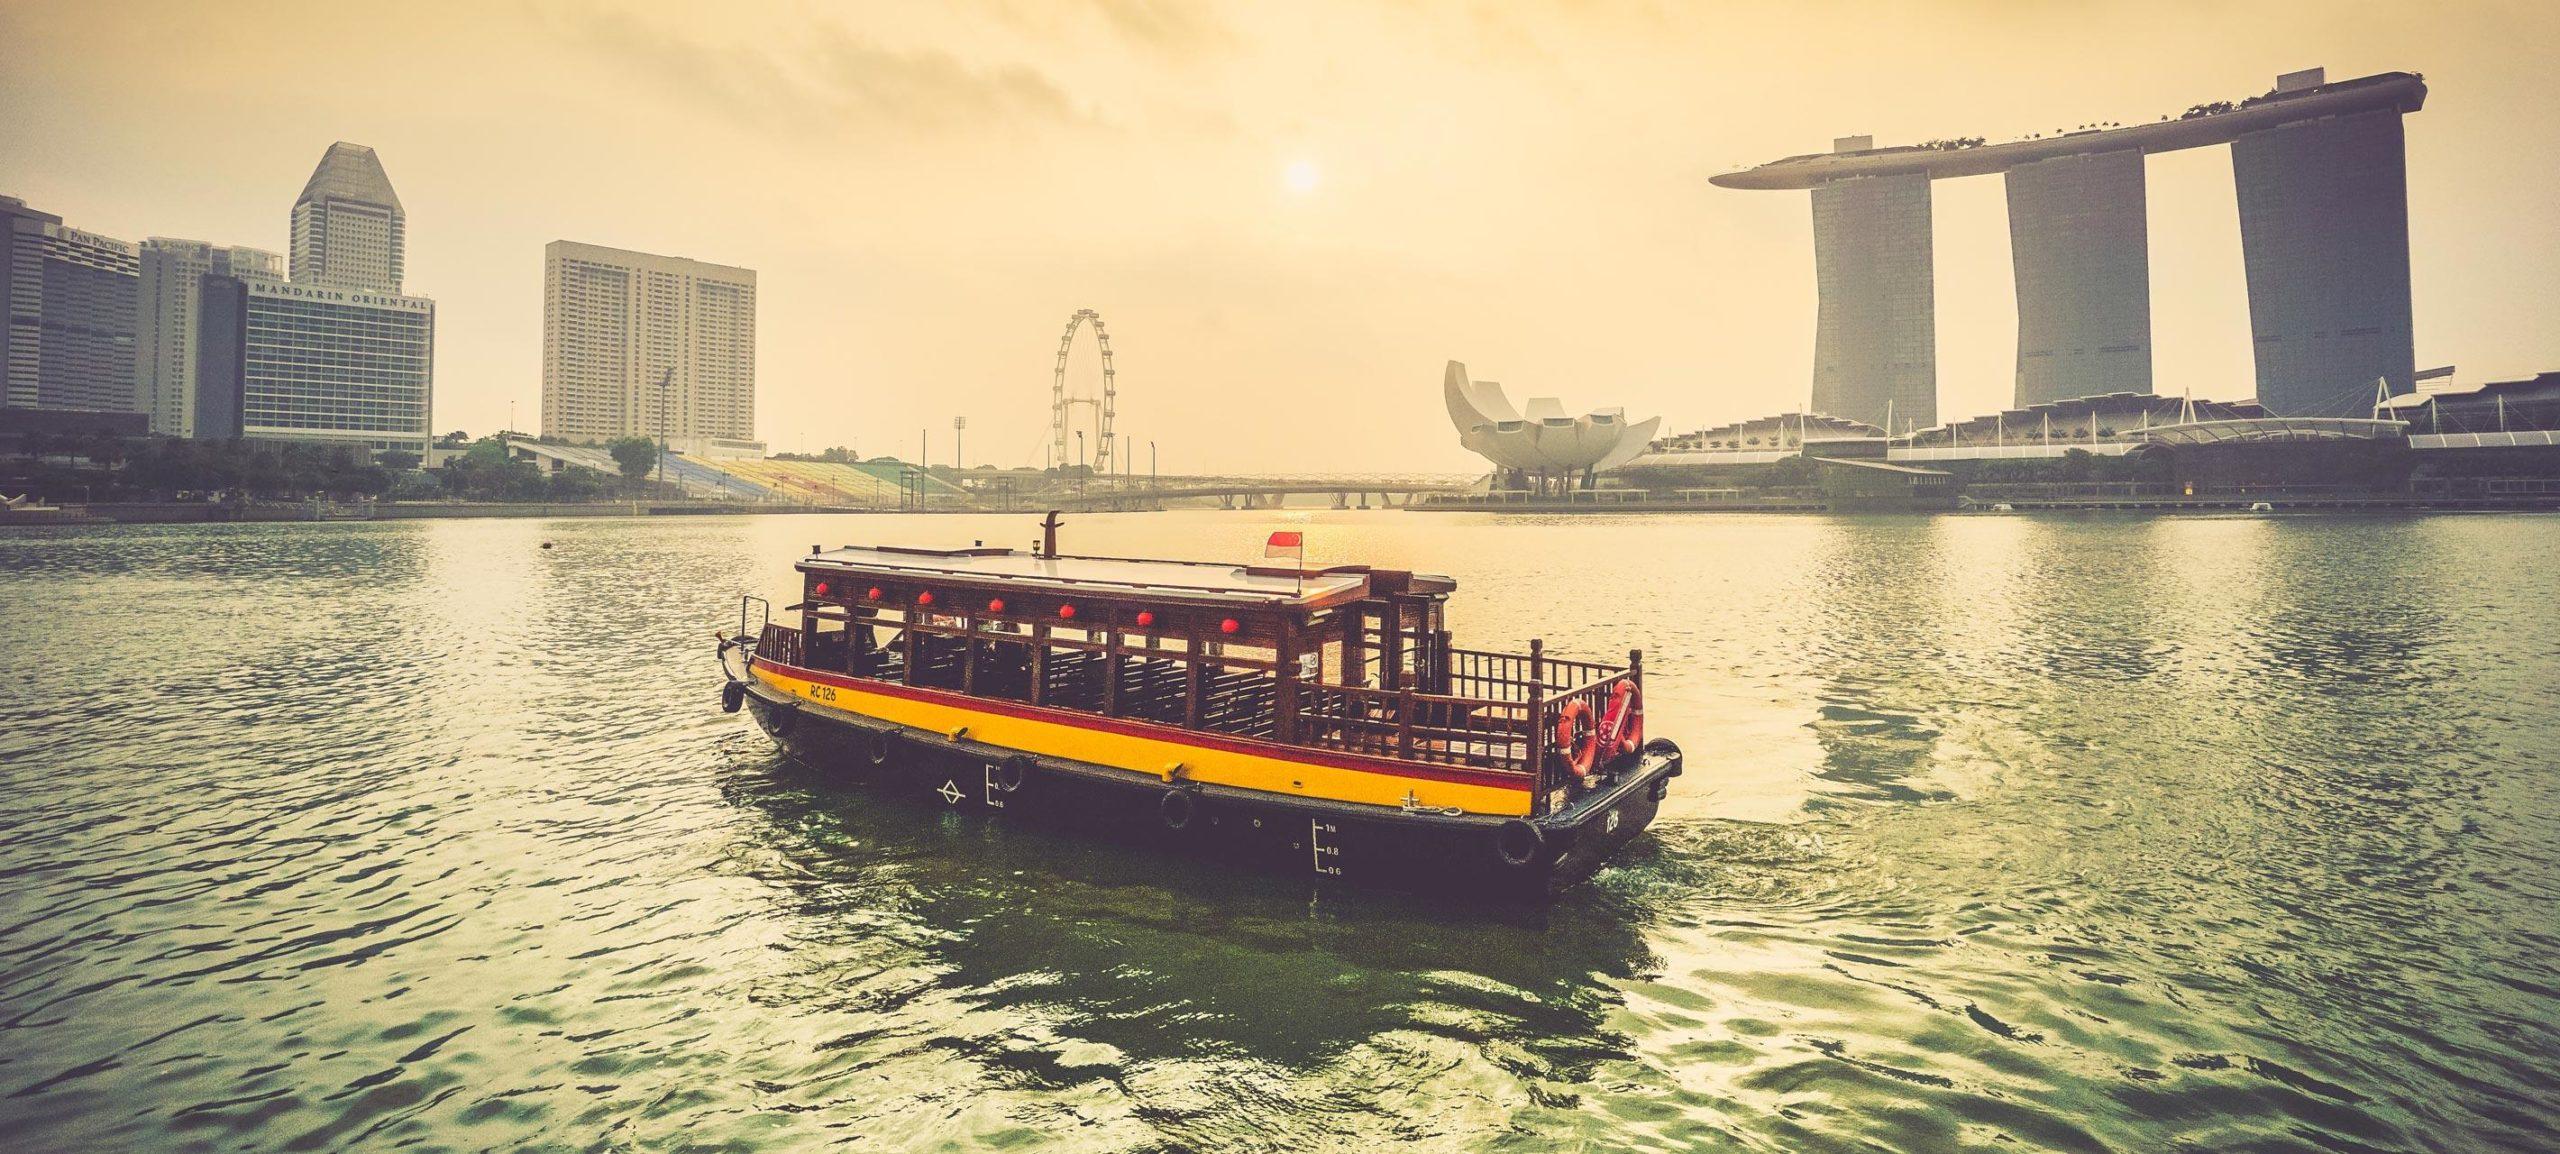 Singapore, boat and ferry. Photo by Mike Enerio on Unsplash